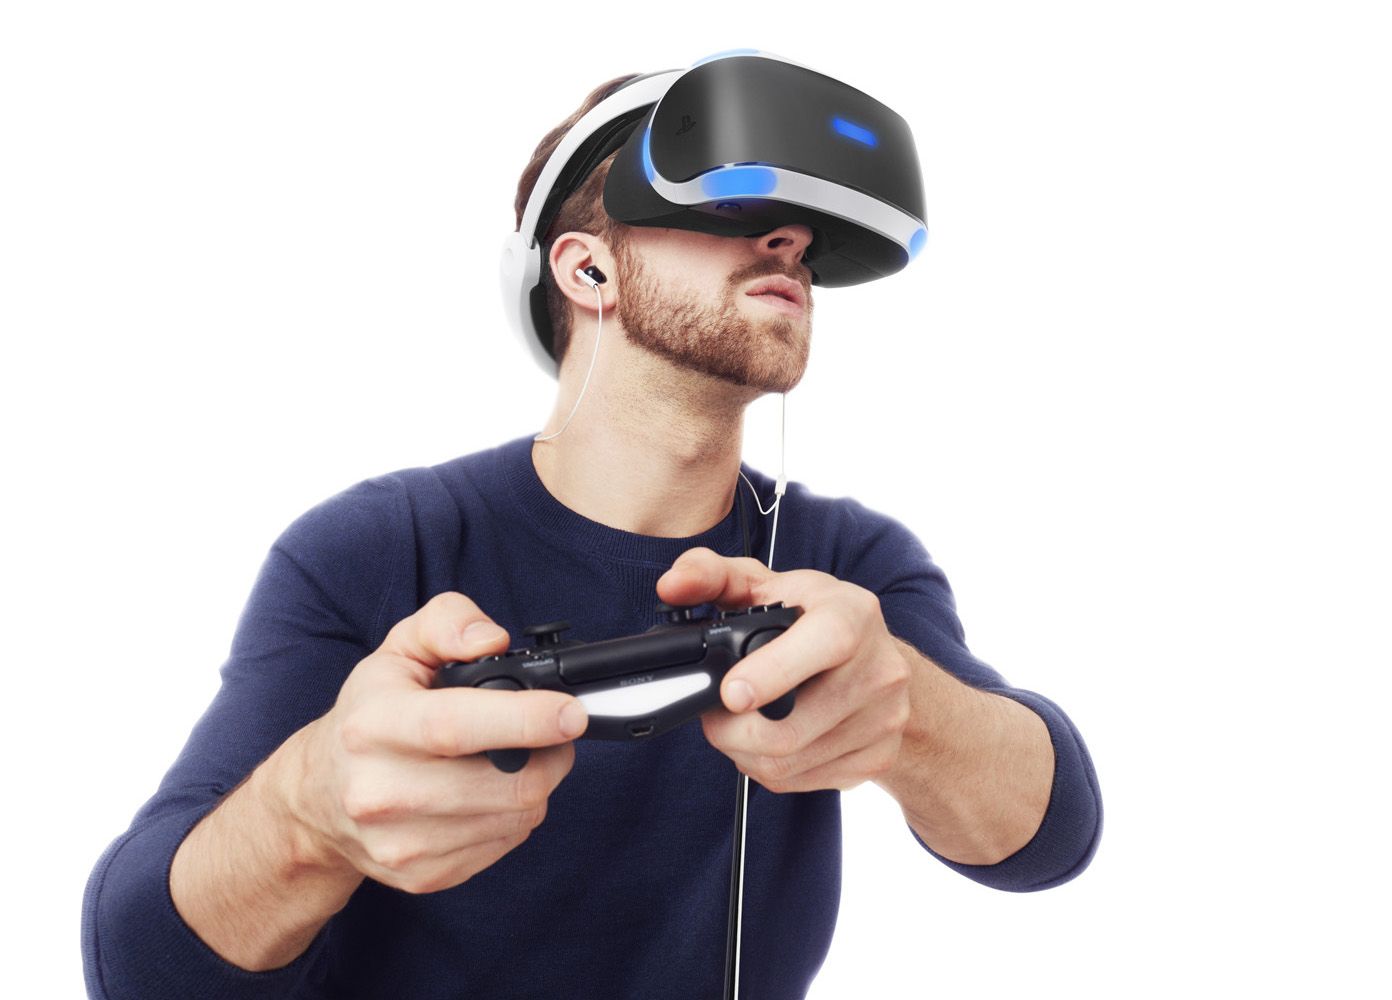 sony won’t be making a loss on playstation vr hardware even at 350 a pop image 1